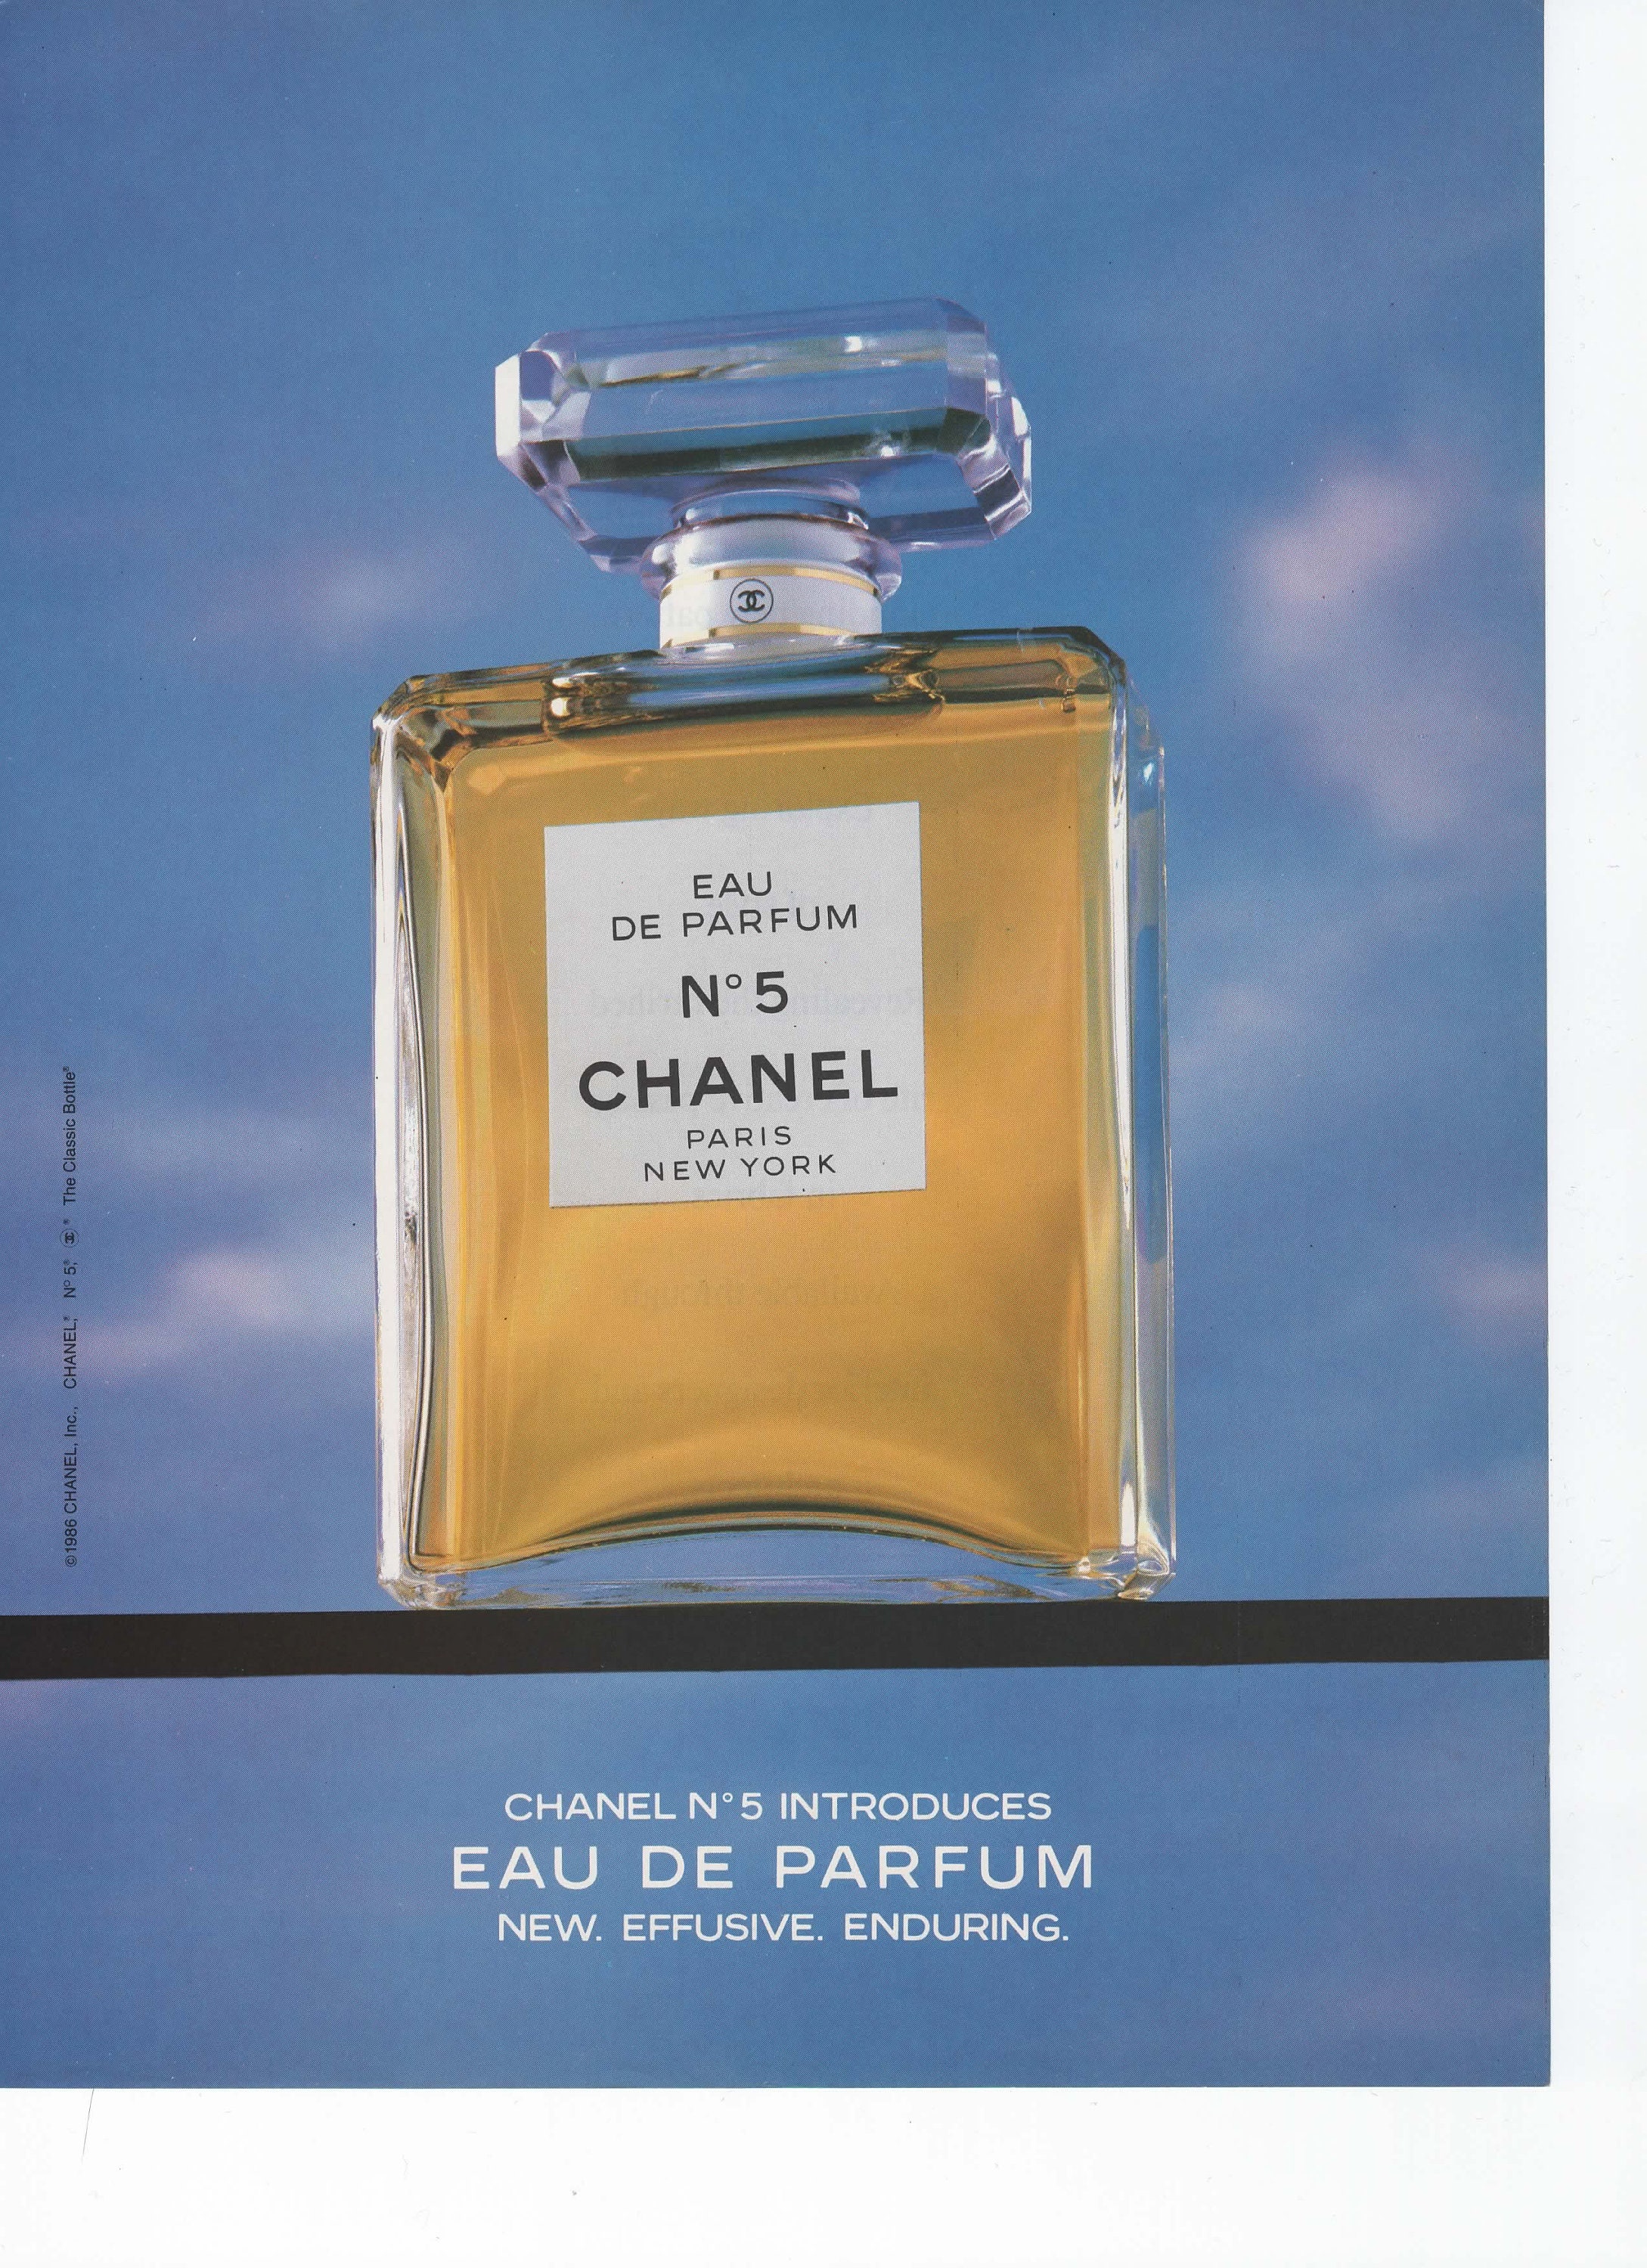 1981 French Chanel No.5 Perfume Advertisement Print, Matted